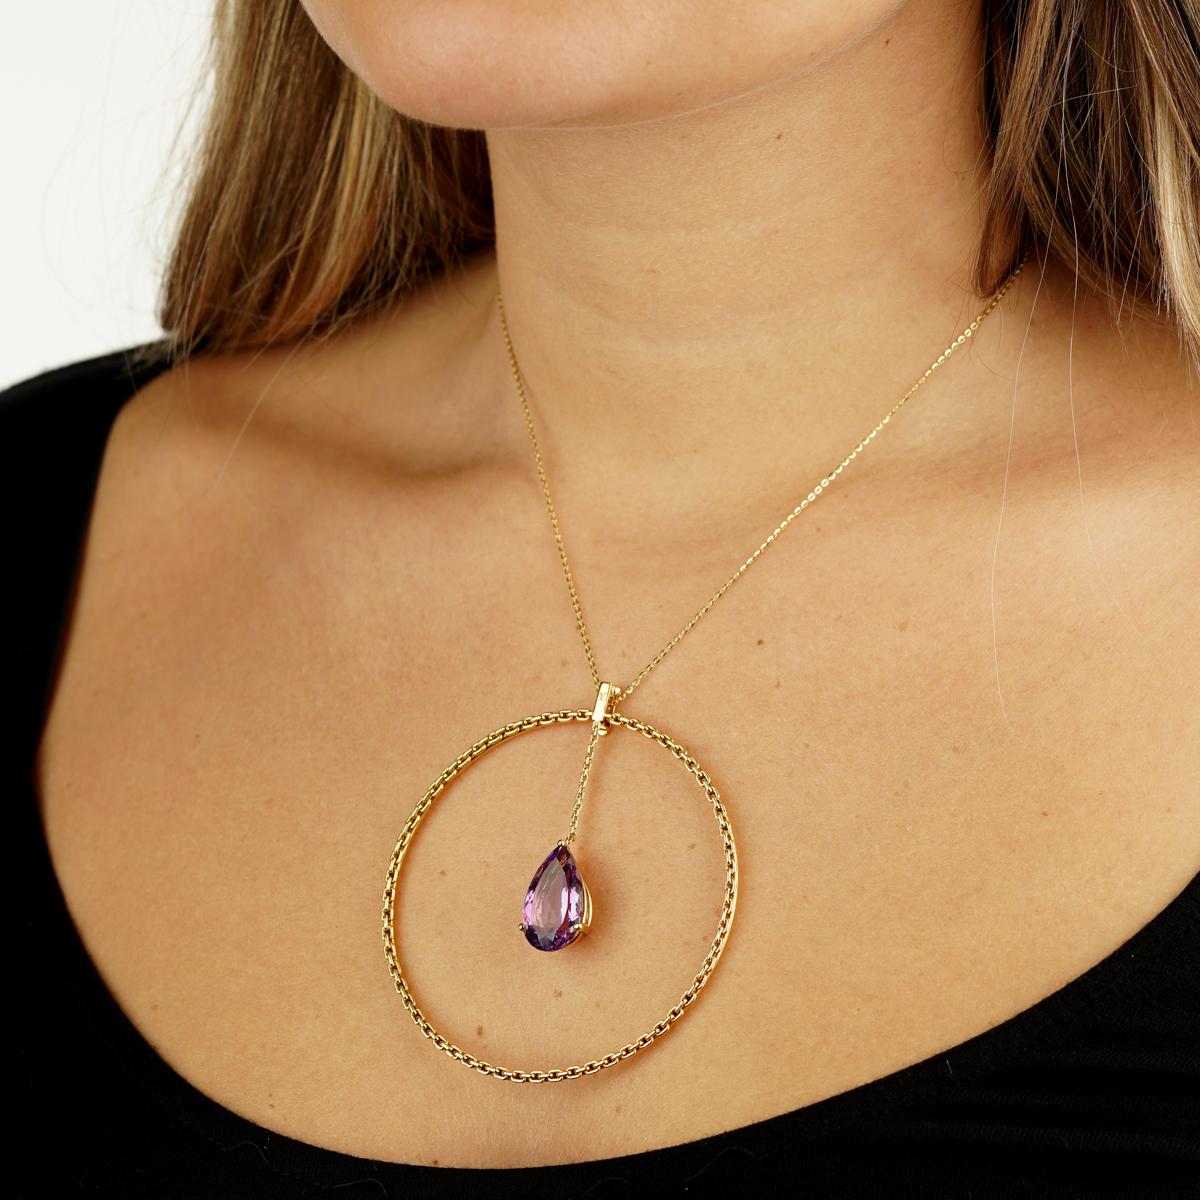 A remarkable Louis Vuitton 18K gold chain pendant. This chic Louis Vuitton gold pendant bracelet has been crafted of 18K yellow gold links, and from these a large and lovely amethyst floats freely on a length of 18K gold chain.

Necklace not